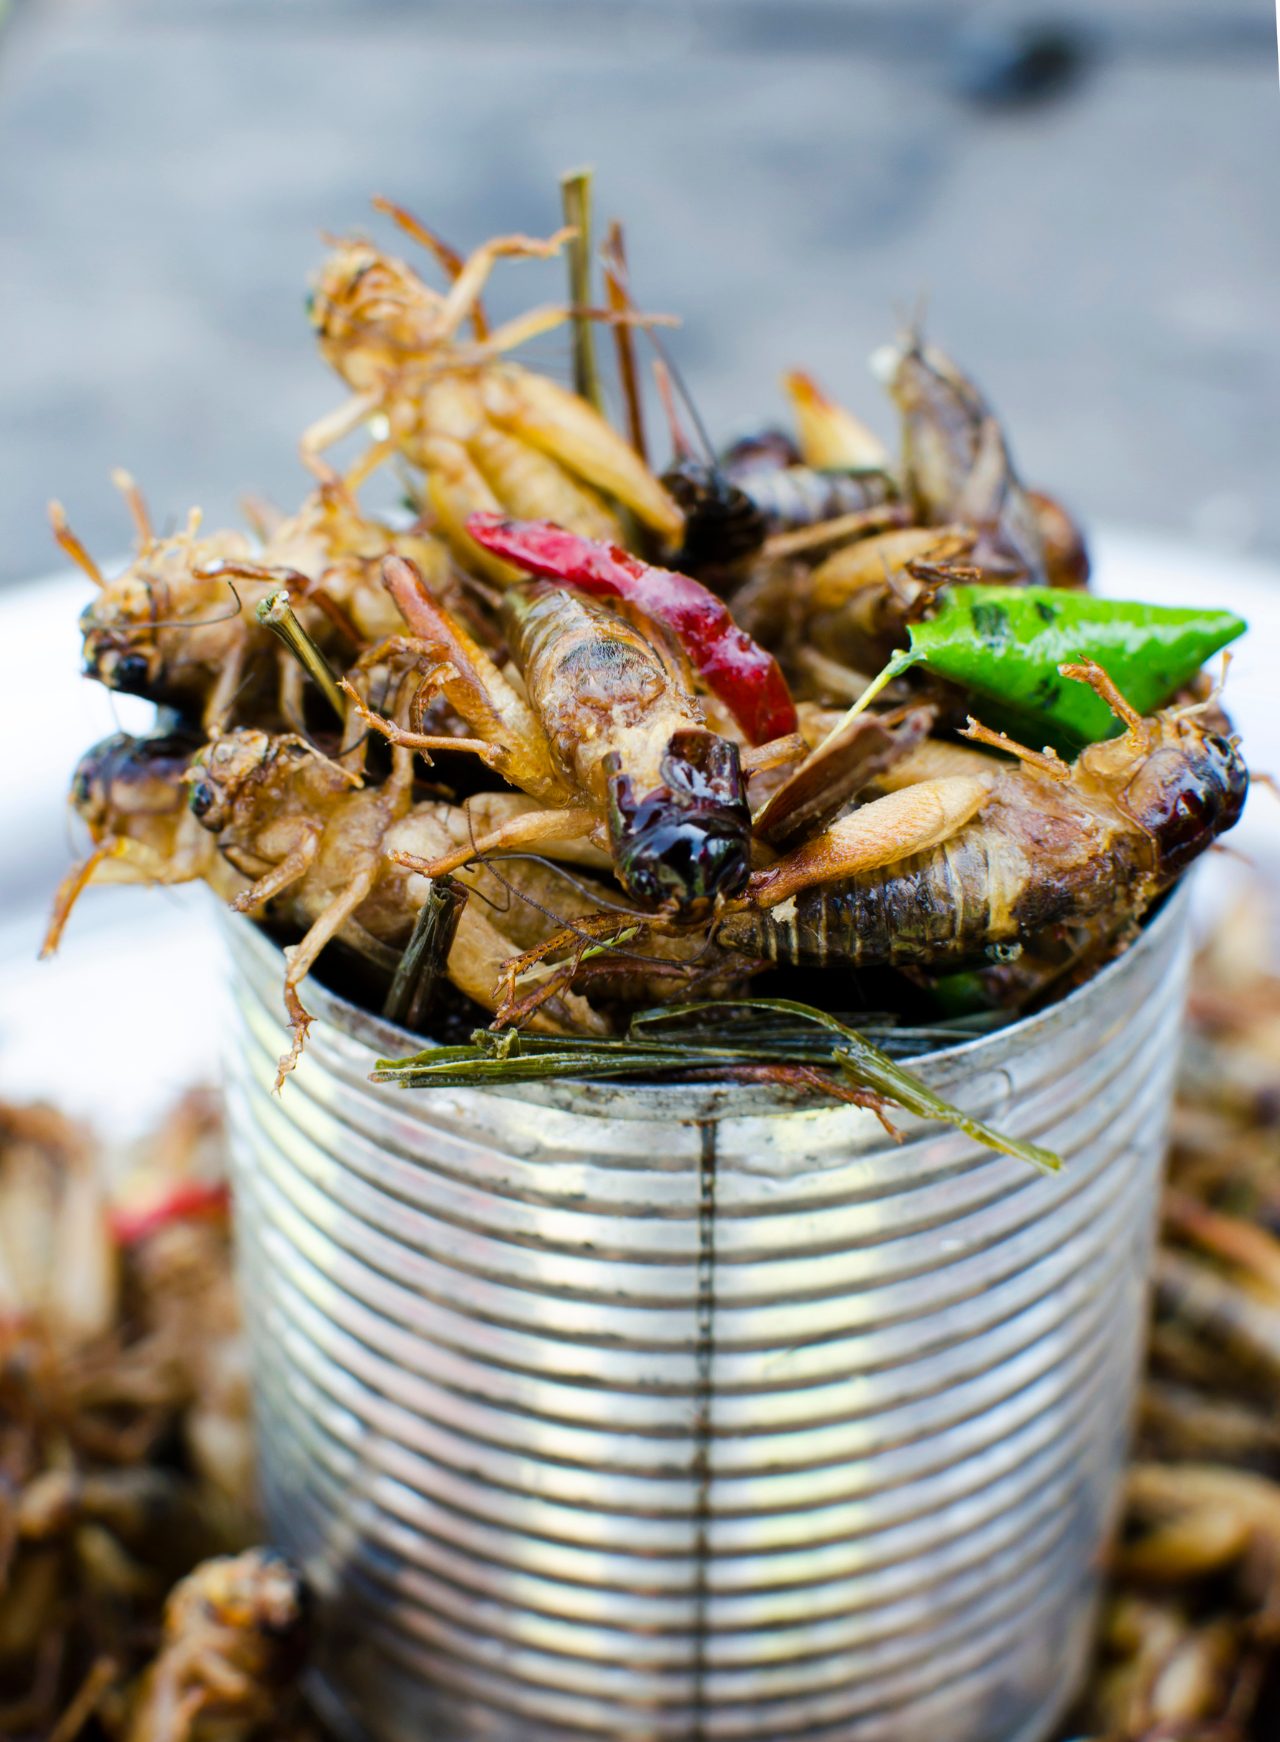 This image shows a container filled with small, fried grasshoppers. The container is made of metal.